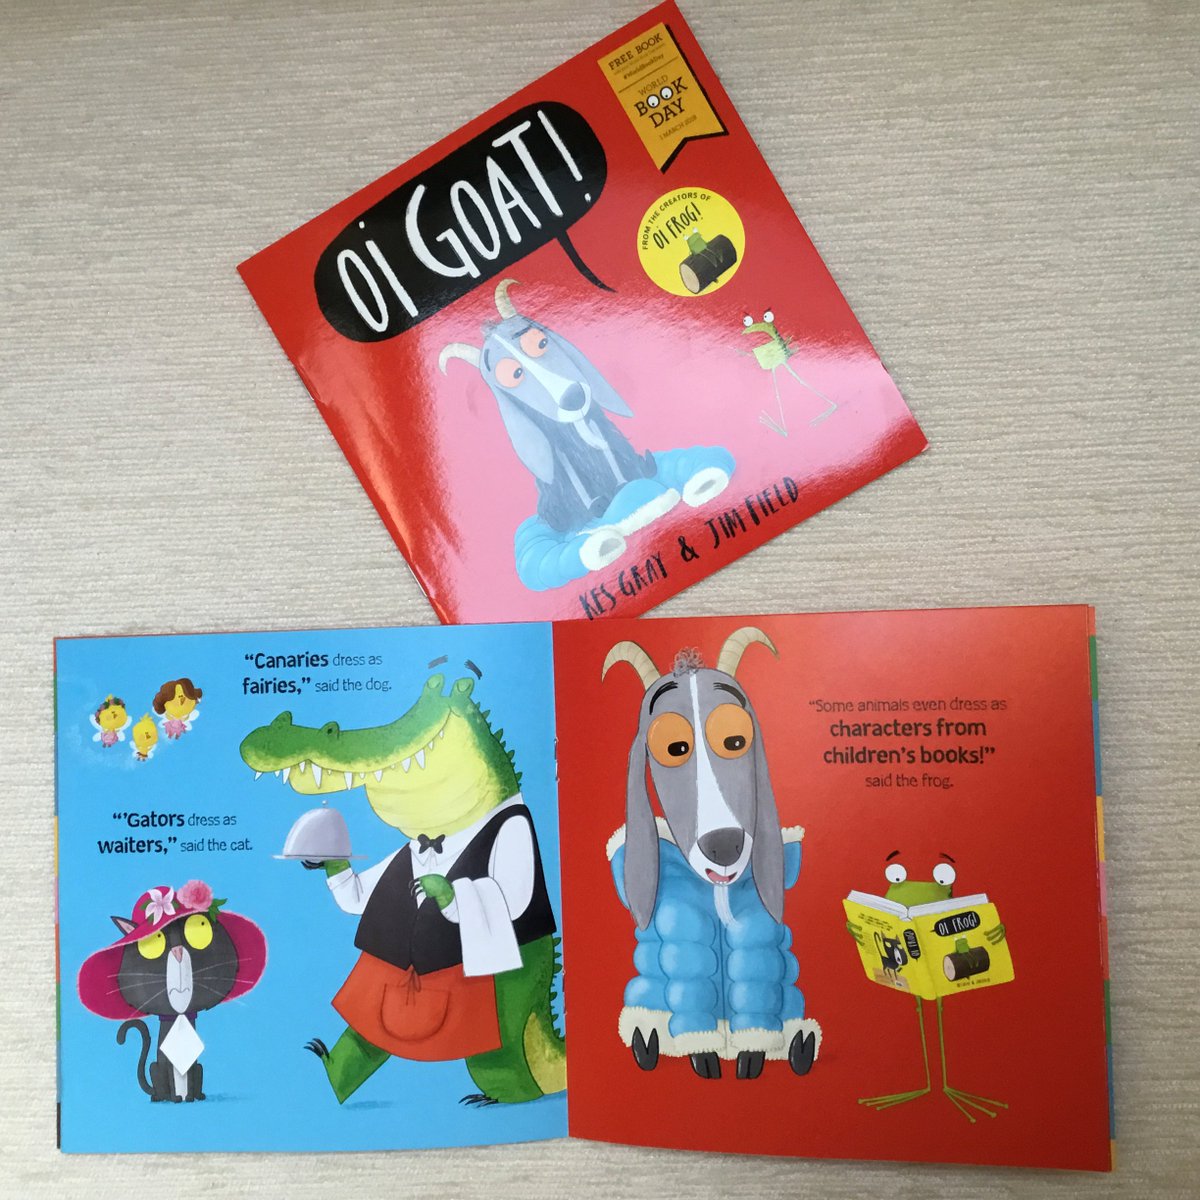 Yay! The postman just delivered my copies of Oi Goat created by the wonderful @_JimField and #KesGray for #WorldBookDay2018  The best £1 you'll ever spend, go buy!... just look at those canaries!!😍😅